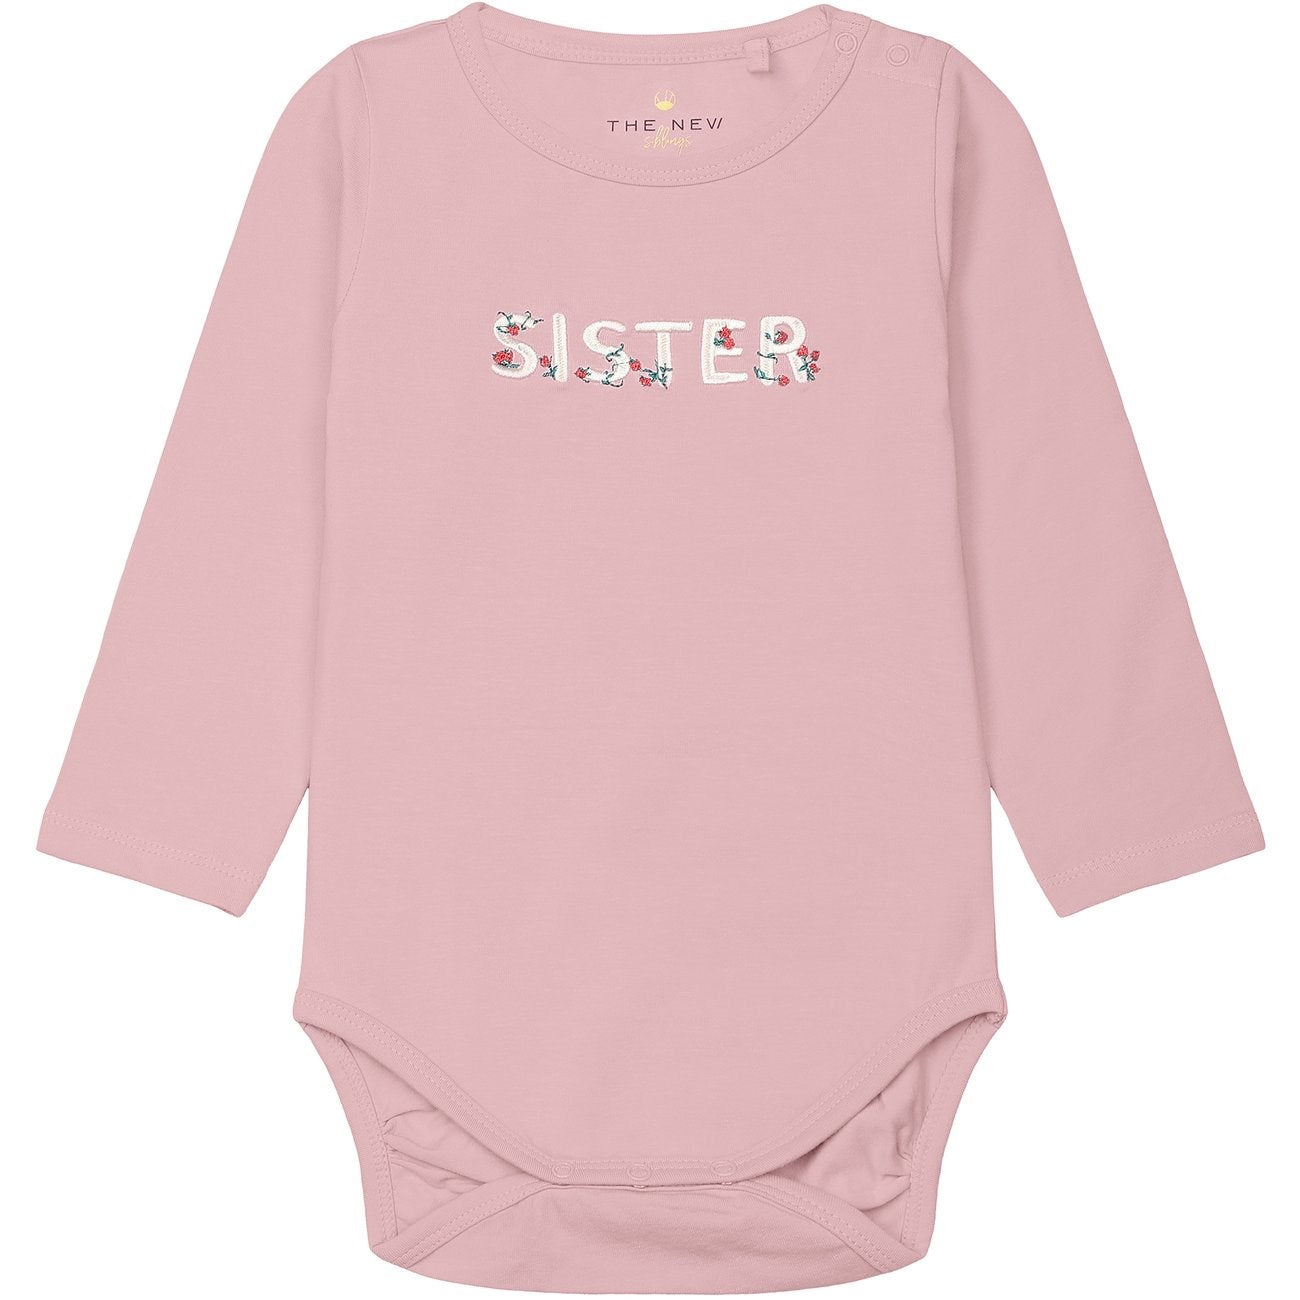 THE NEW Siblings Pink Nectar Jazzlyn Body